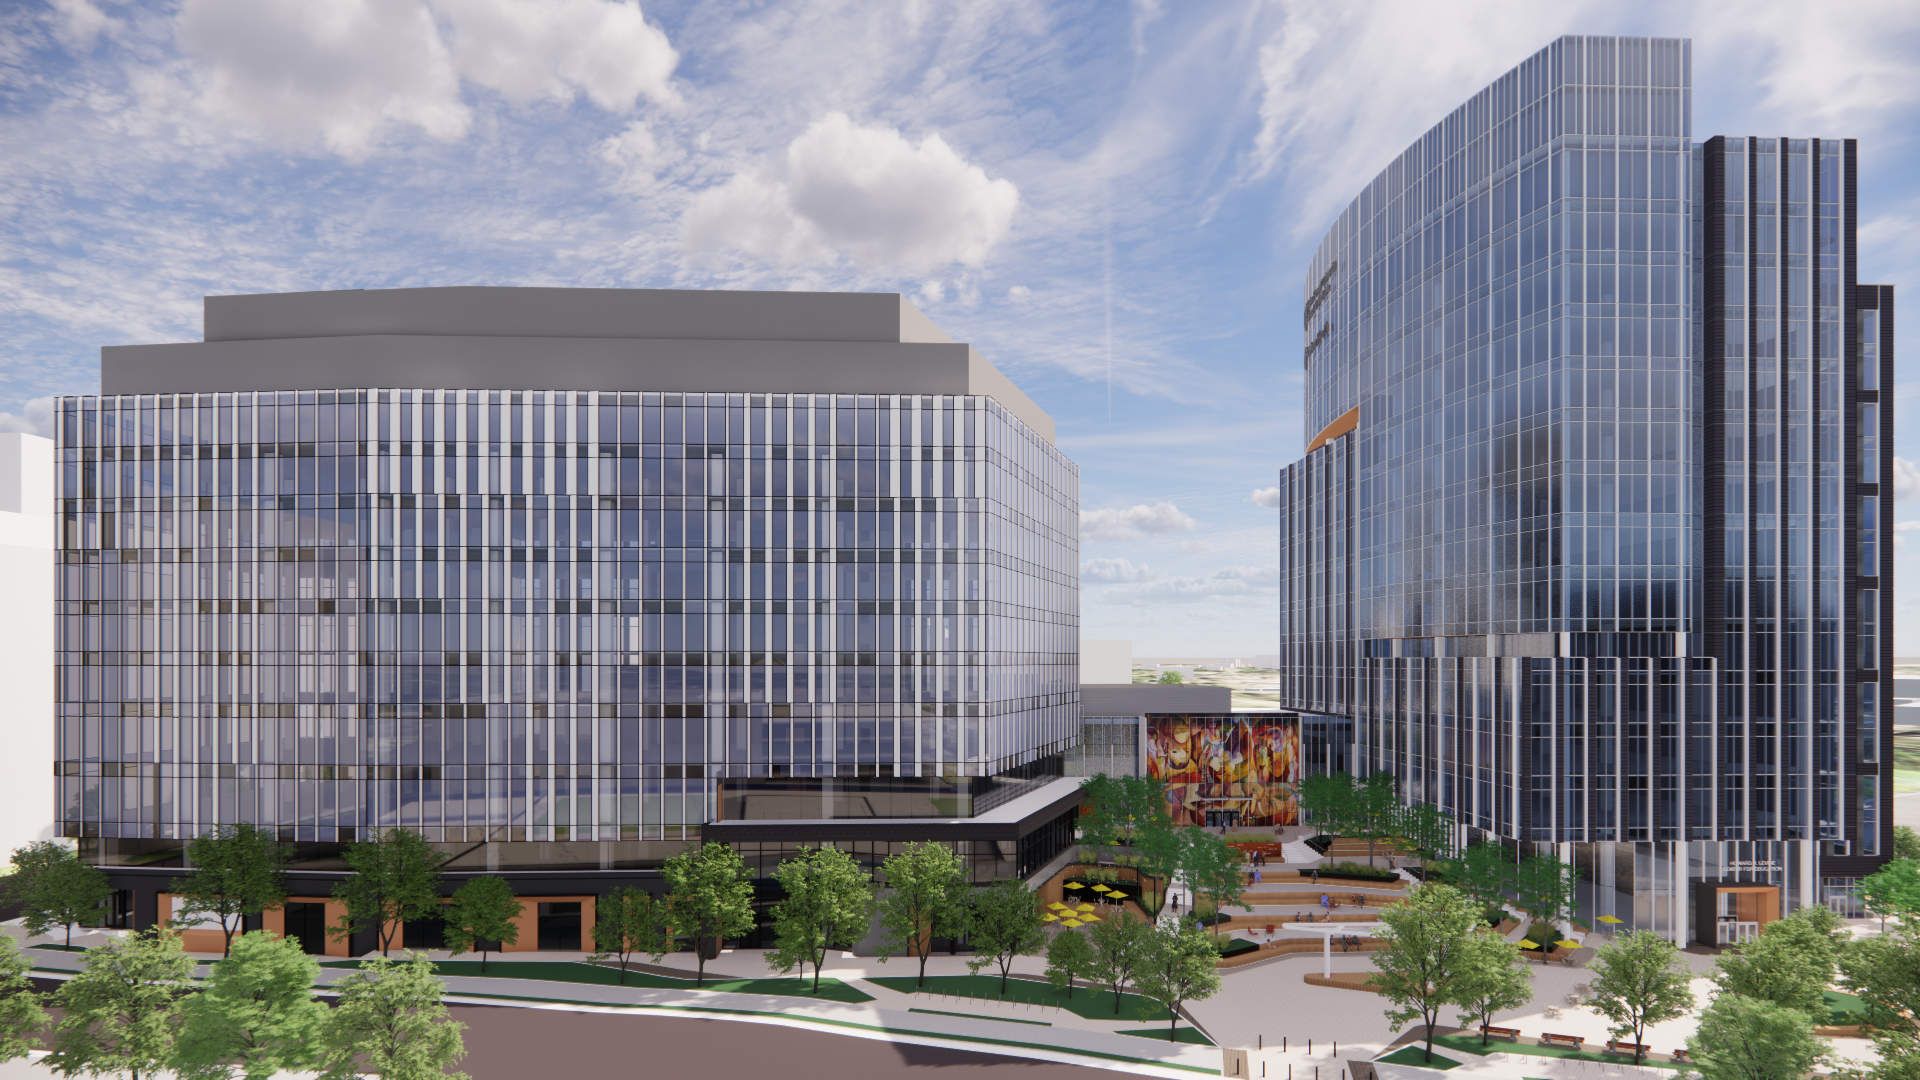 A new rendering of phase 1 of "The Pearl" innovation district